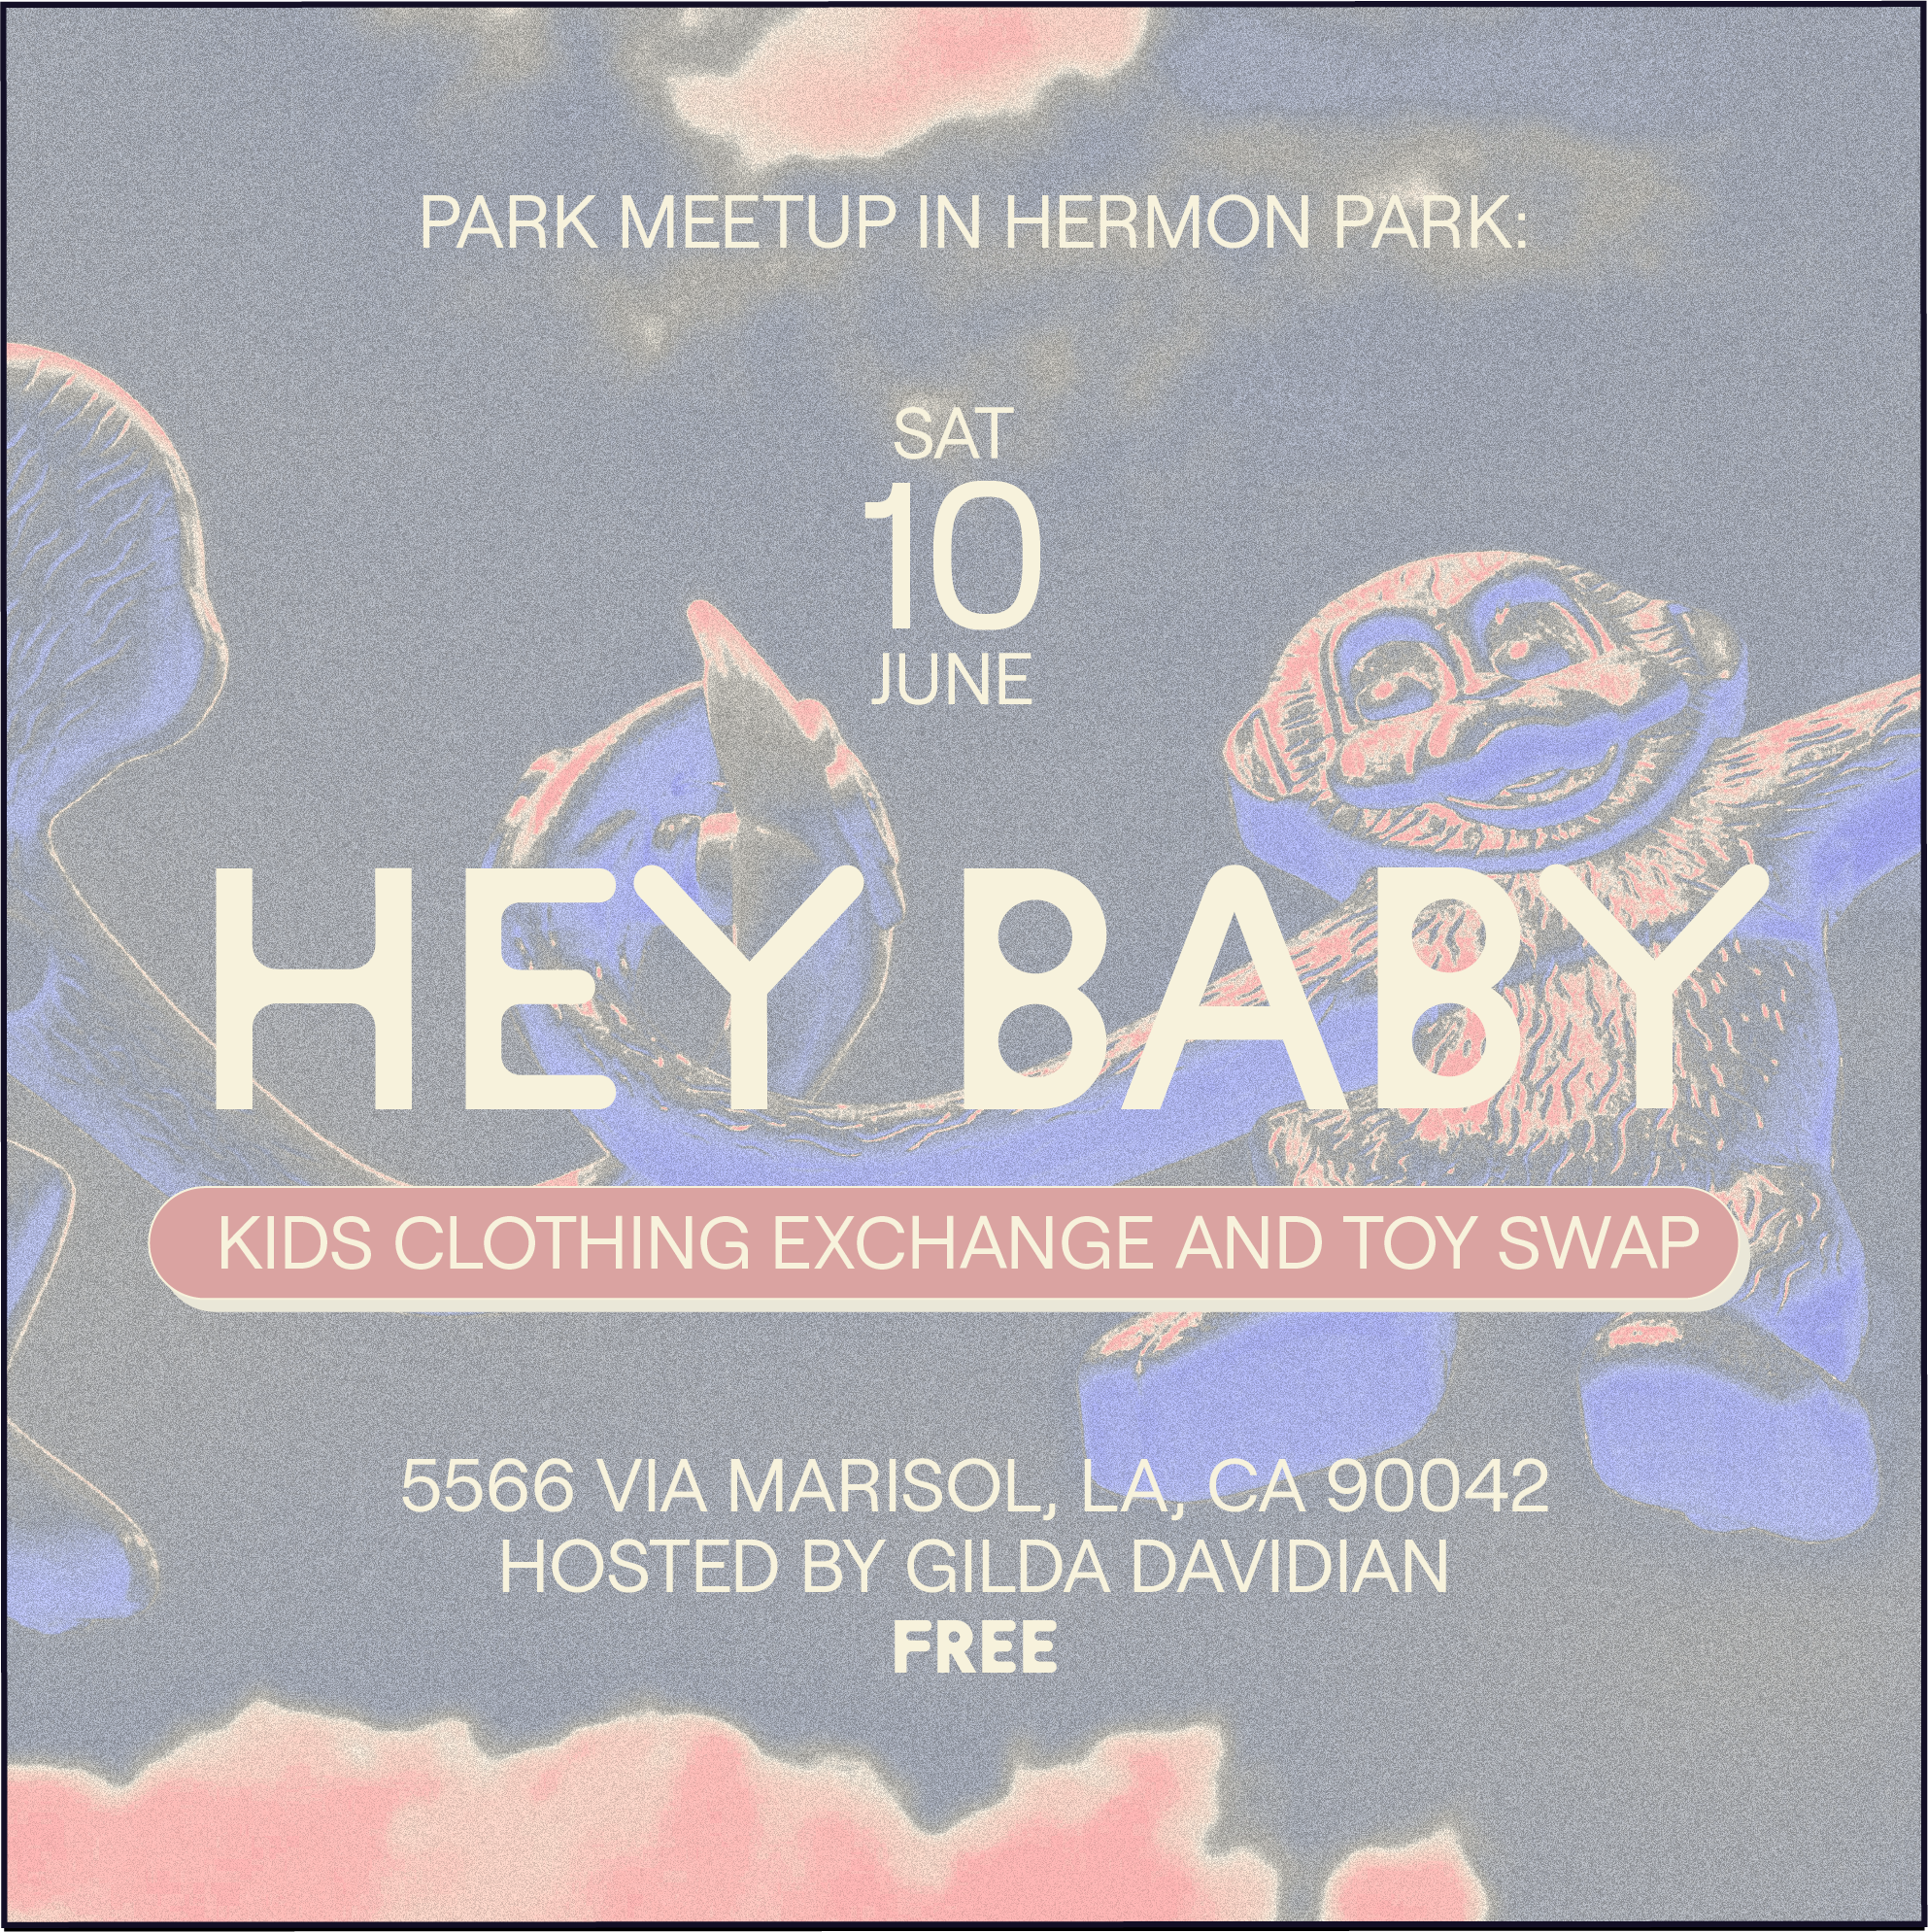 Hey Baby: Kids Clothing Exchange and Toy Swap